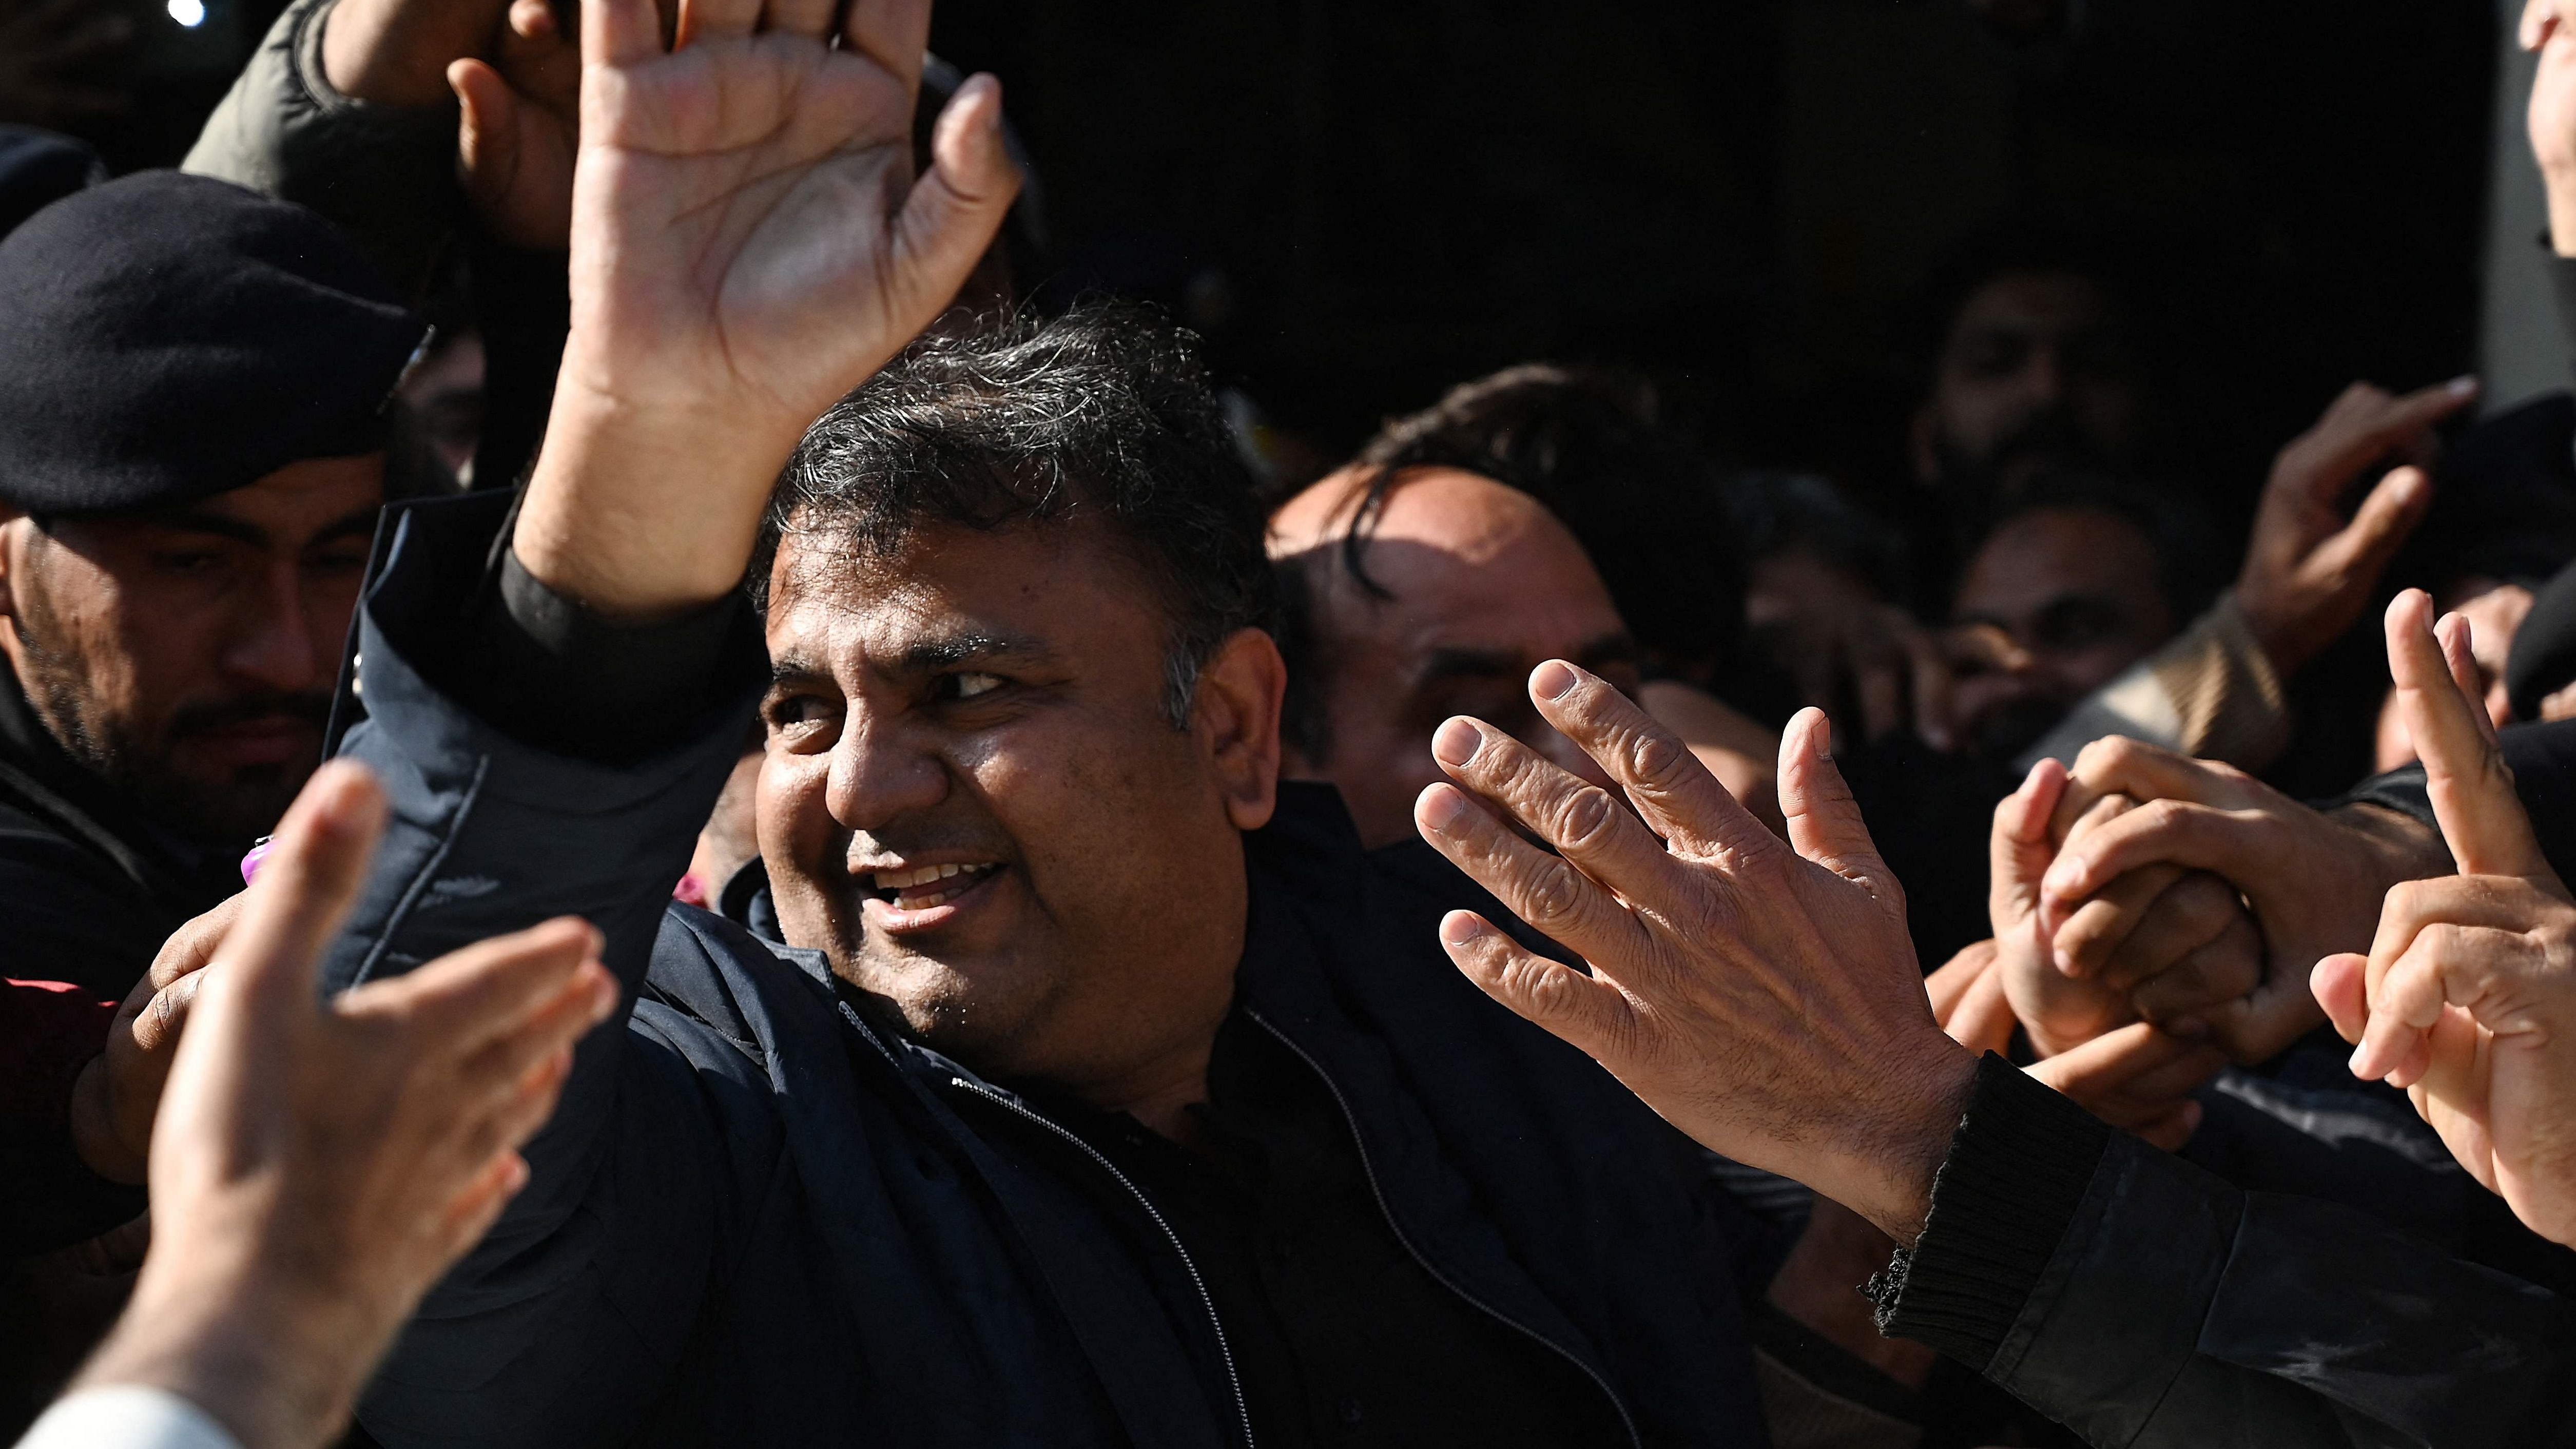 Pakistan's former information minister Fawad Chaudhry (C) gestures as police officials escort him after a hearing at a court in Islamabad. Credit: AFP Photo